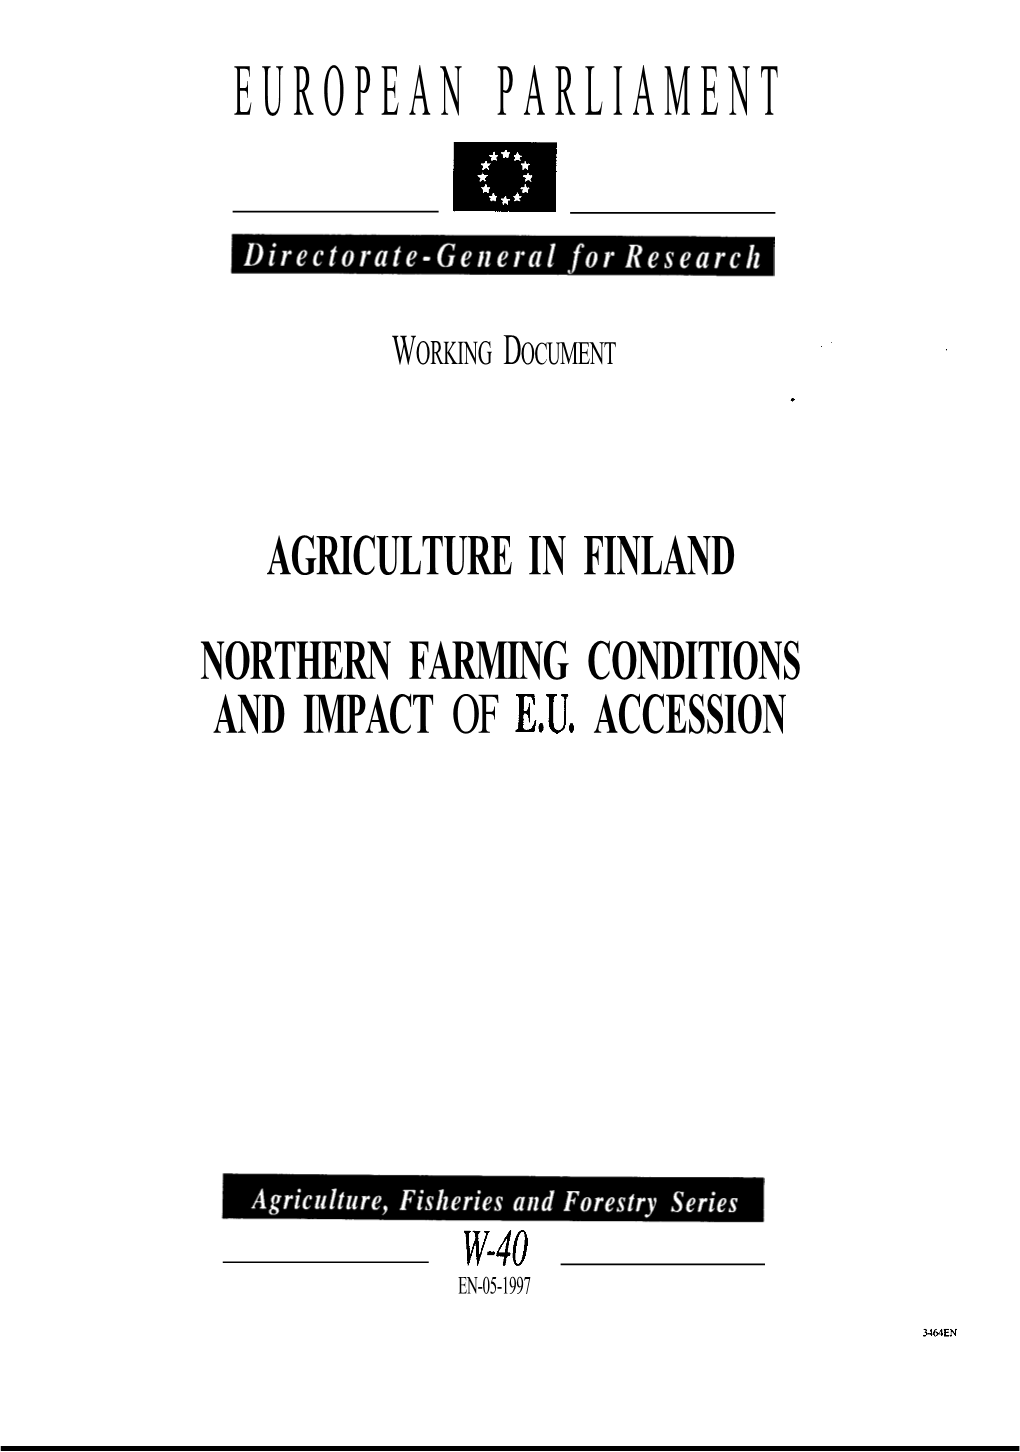 Agriculture in Finland Northern Farming Conditions and Impact of E.U